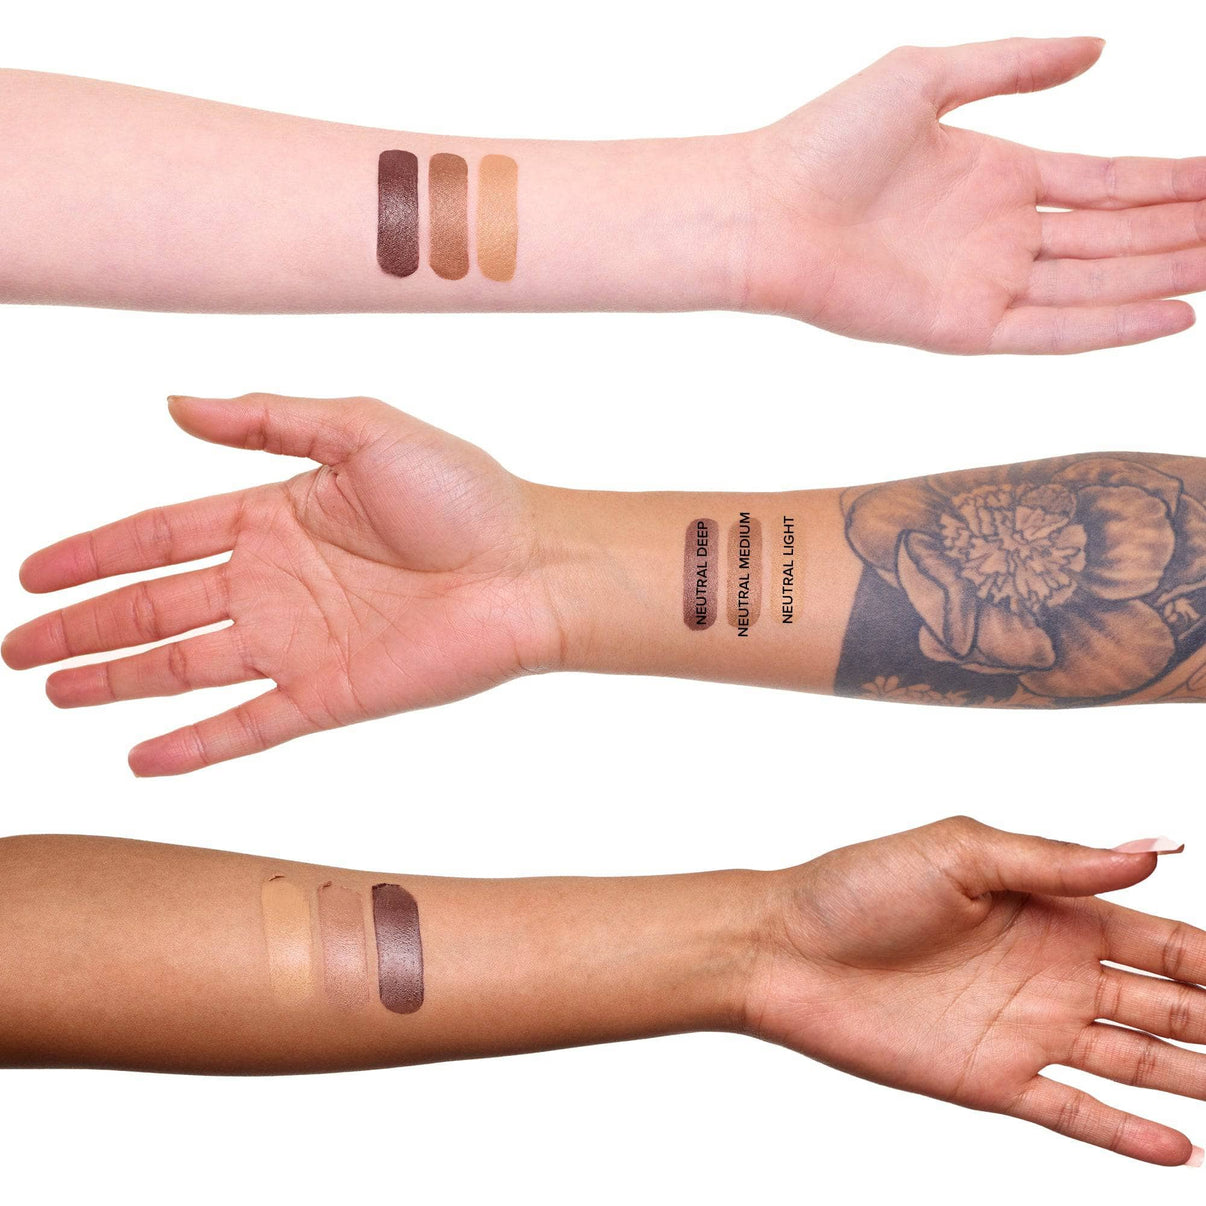 Arms with swatches of Tinted Blur Sculpt Stick medium